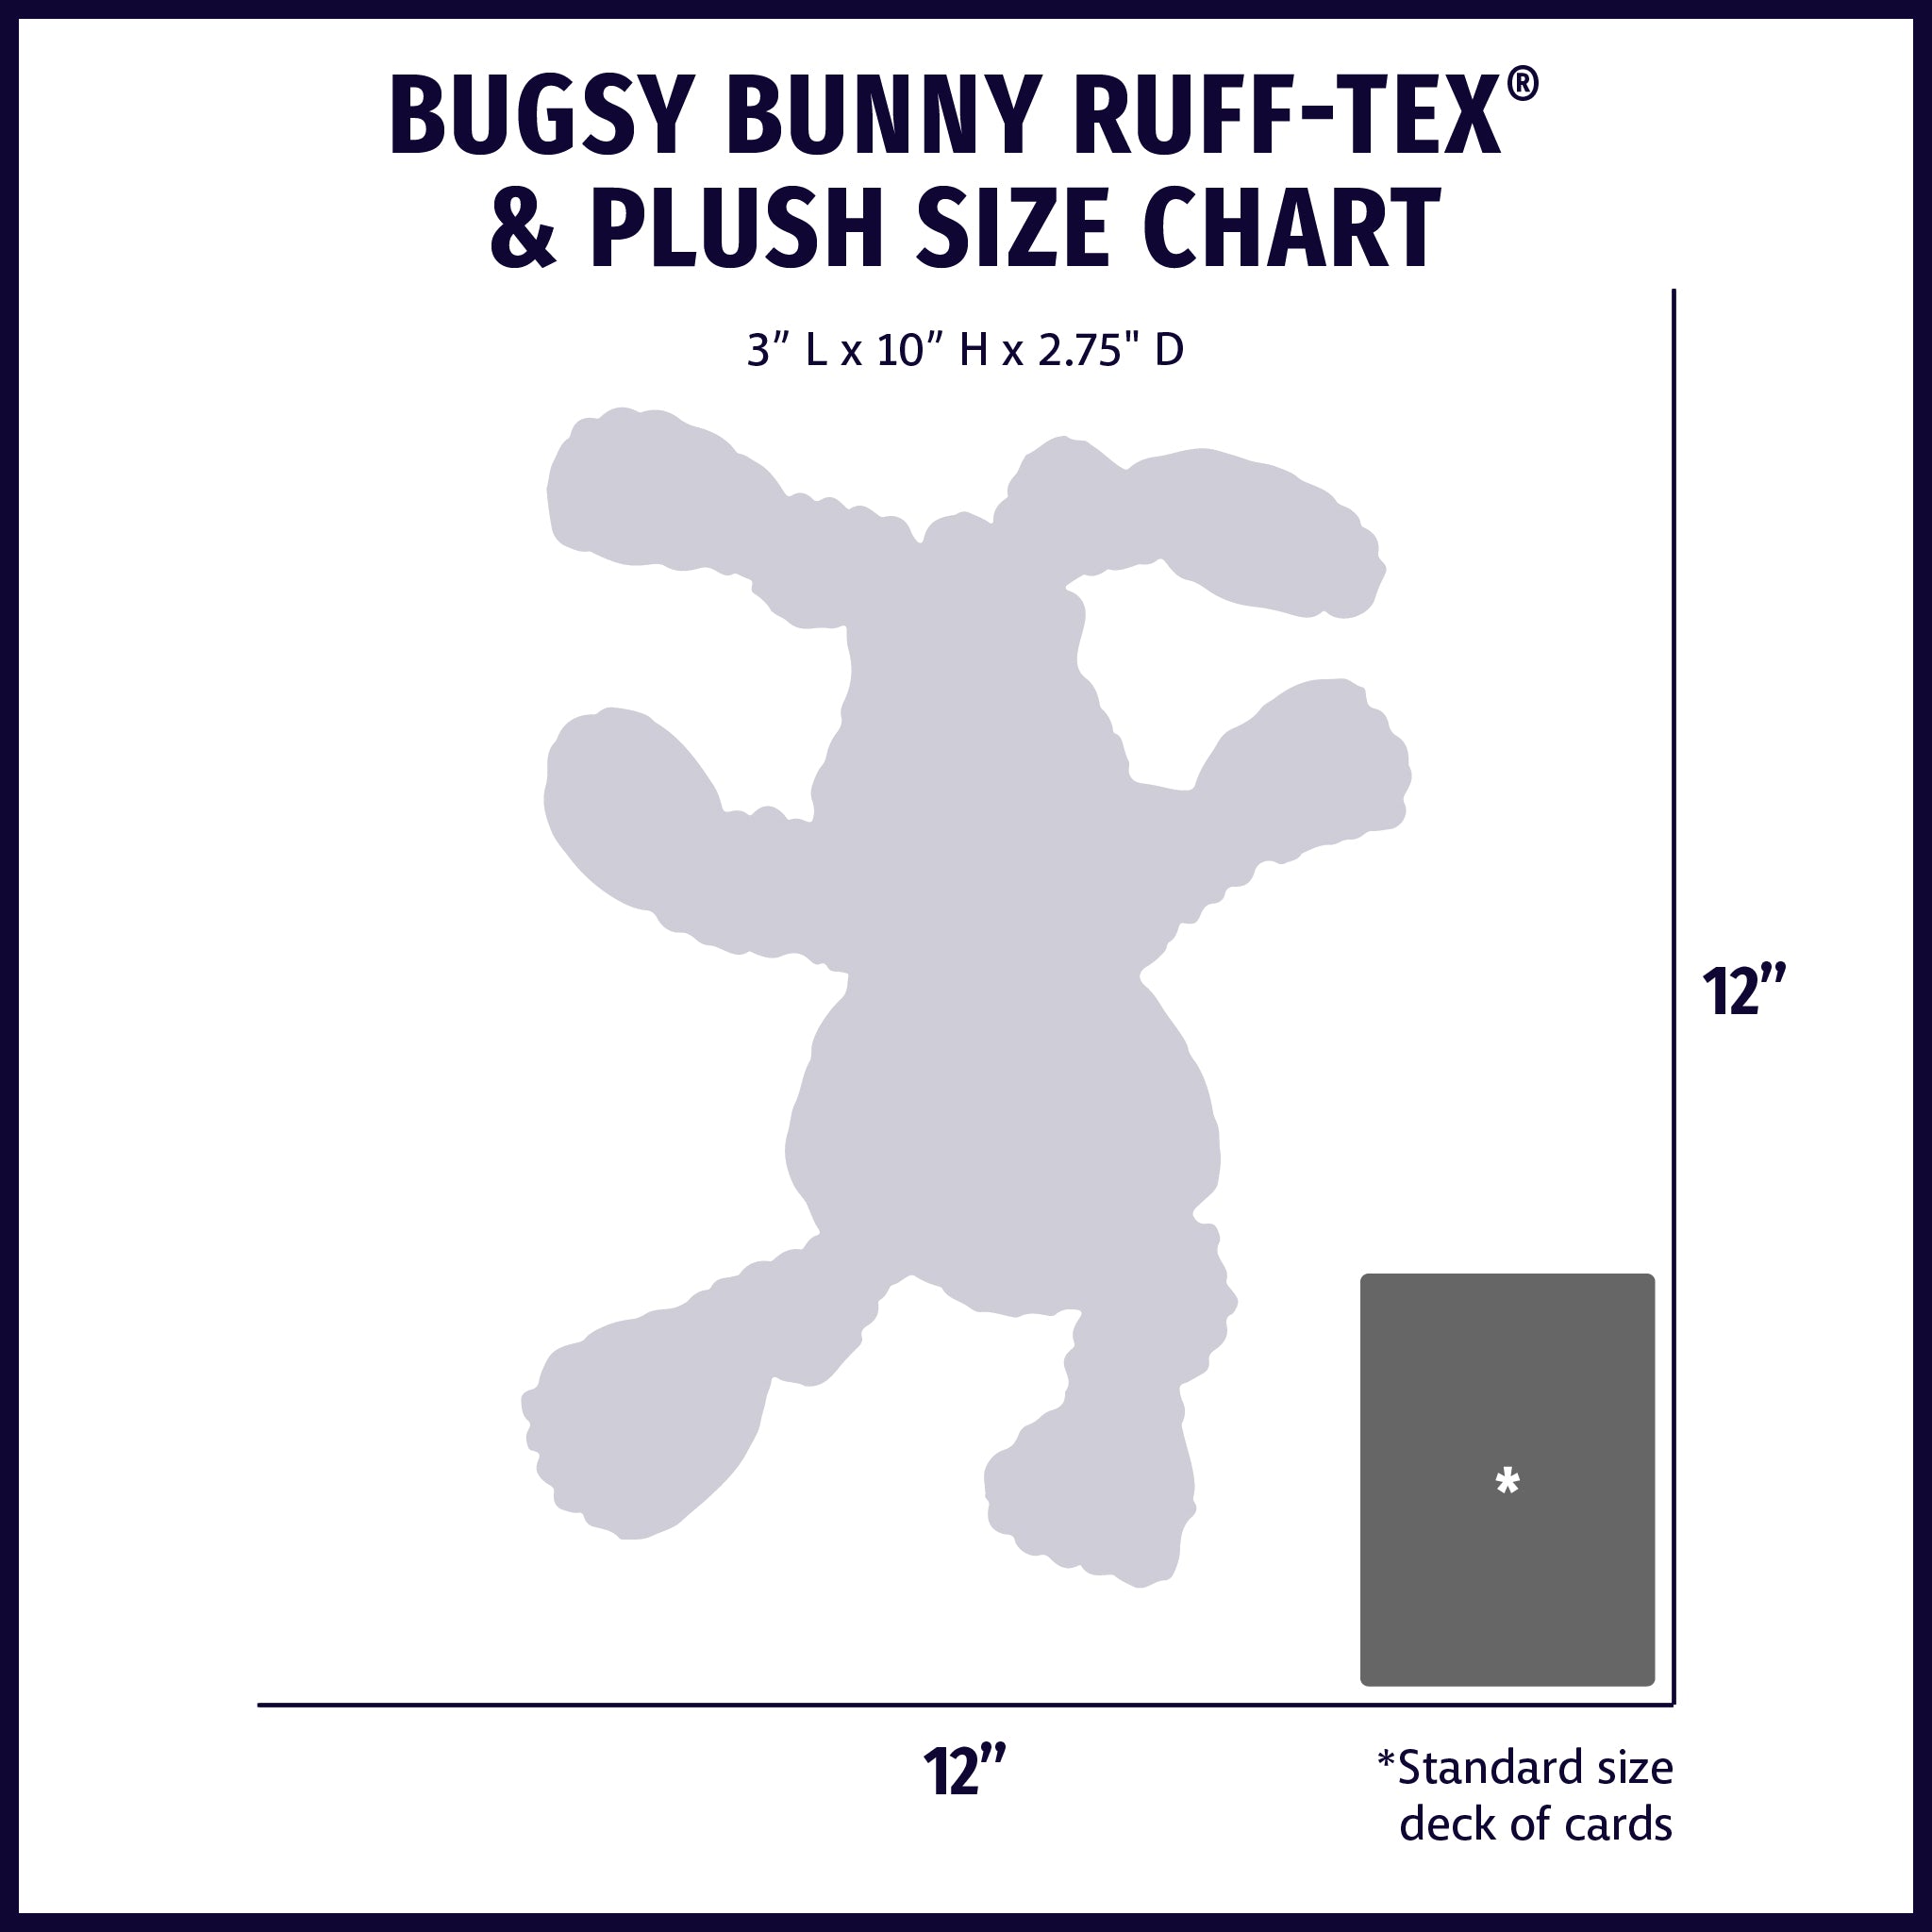 Size chart displaying Bugsy Bunny HuggleFusion® plush and latex dog toy silhouette with approximate dimensions compared to standard size deck of cards.